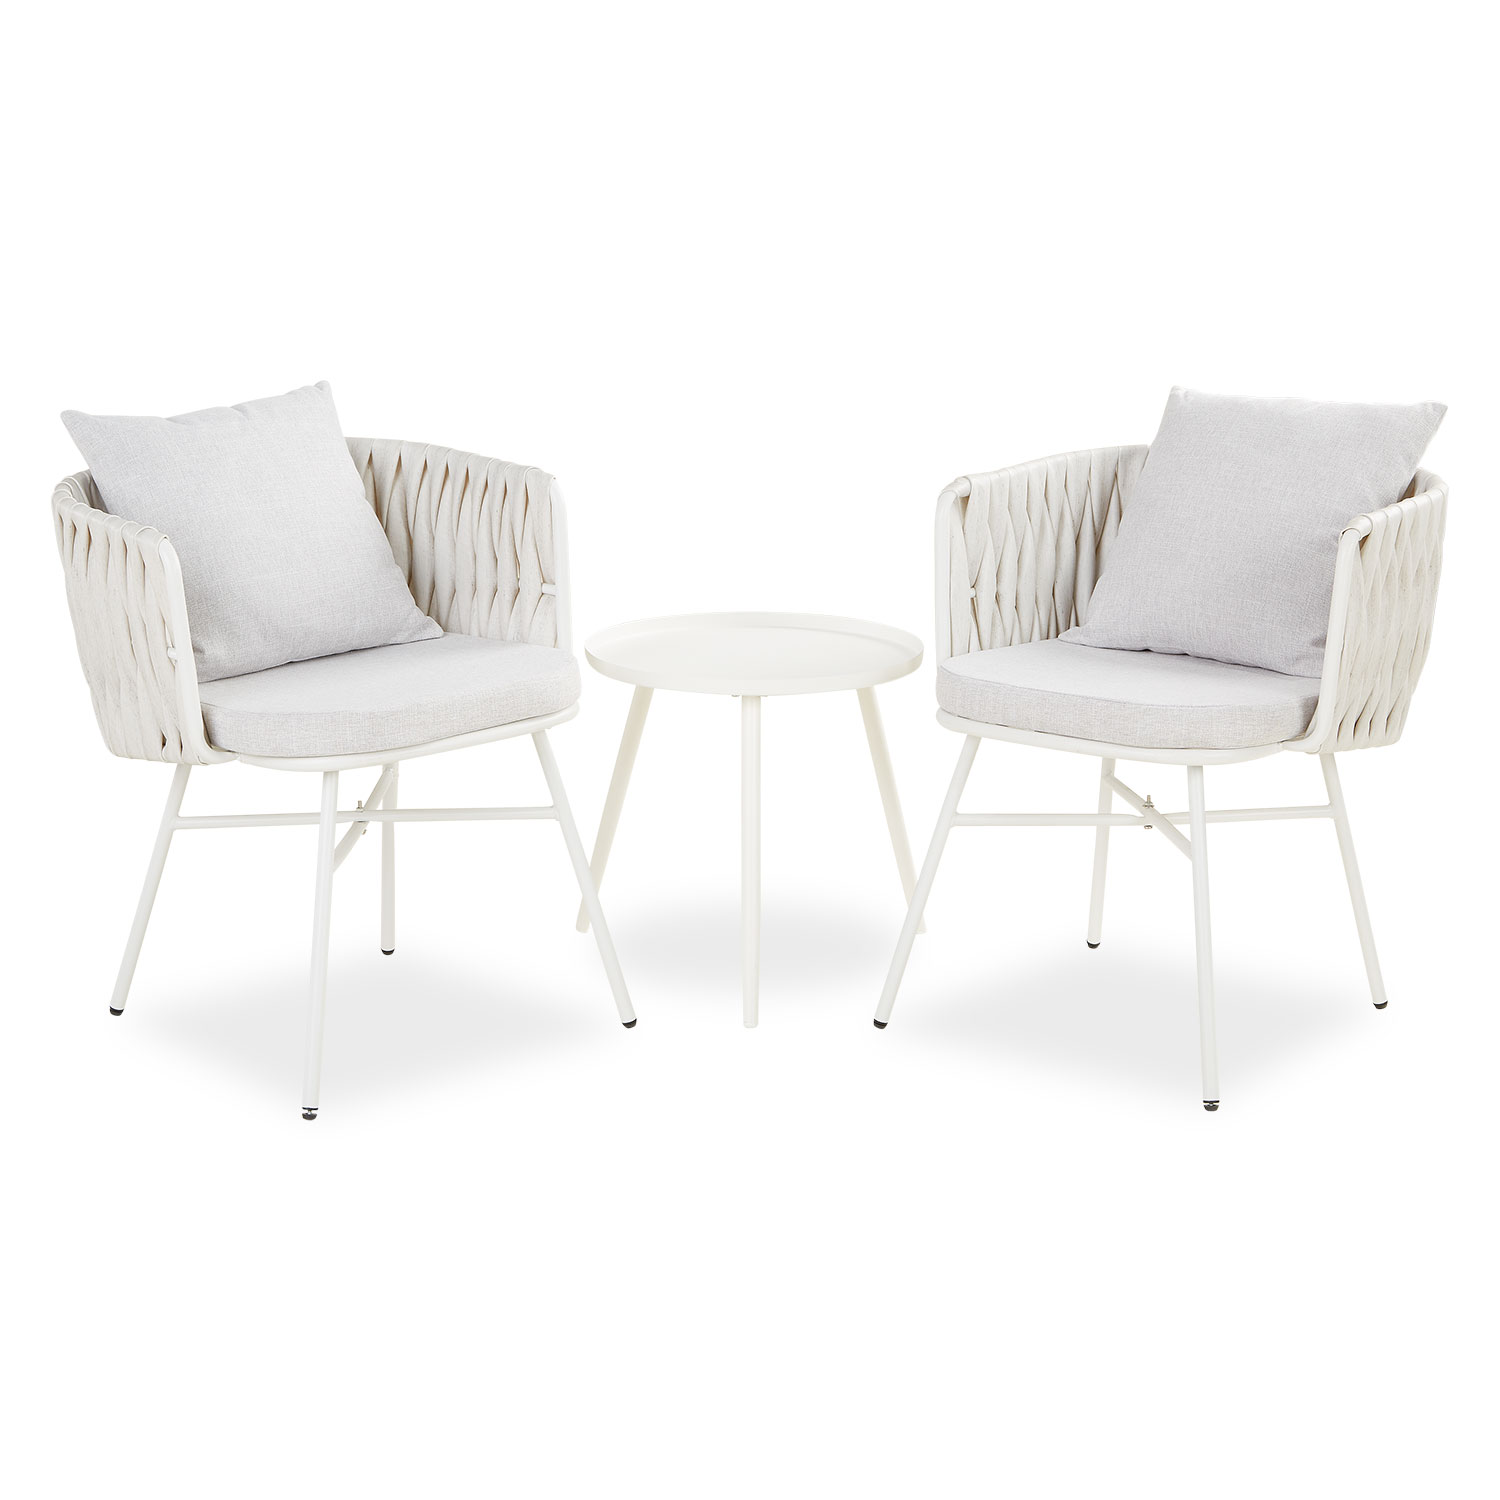 Garden furniture set Garden table and 2 chairs Bistro set Rattan White Outdoor table and chairs Lounge chair Patio set